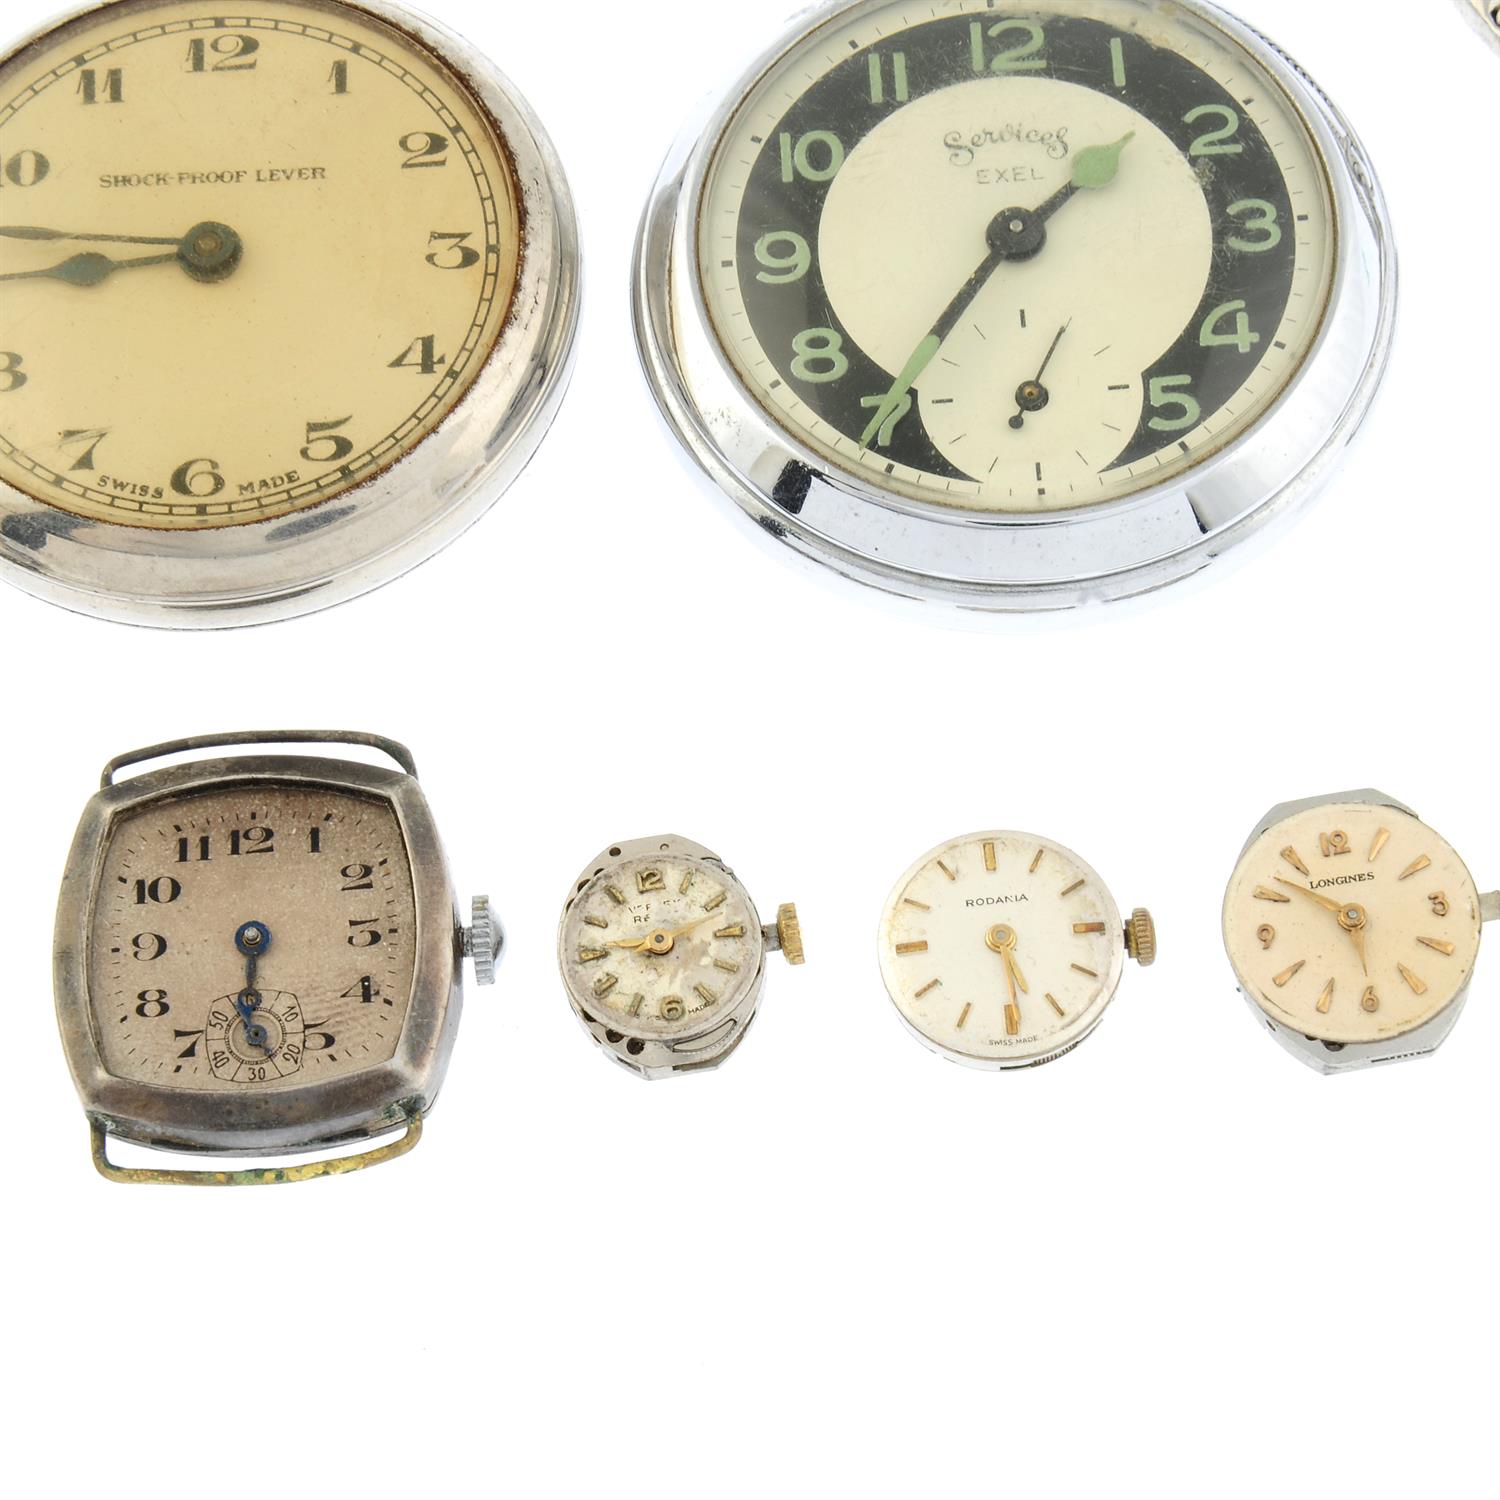 A group of watches and movements. - Image 2 of 3